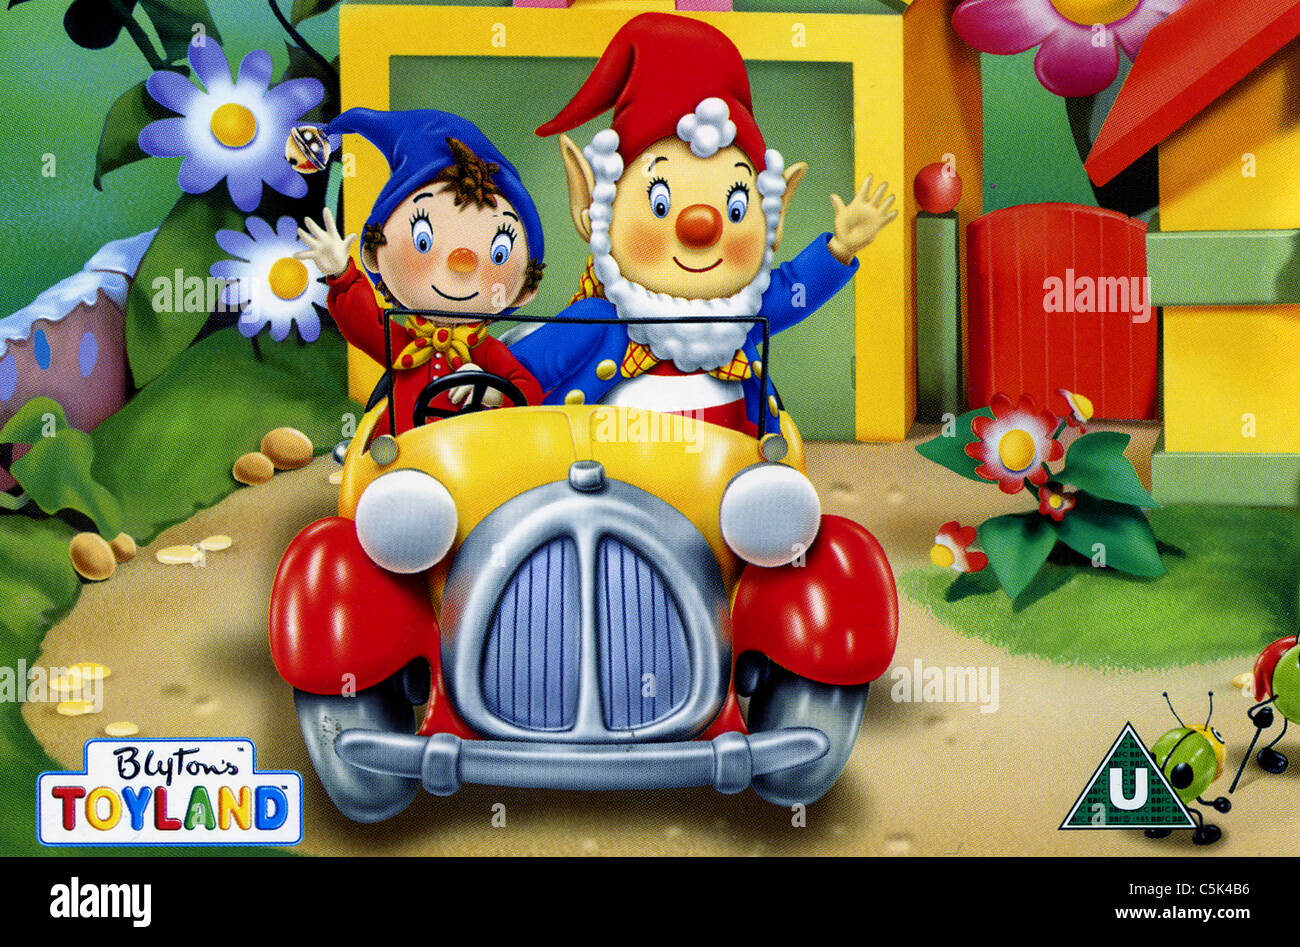 Incredible Compilation of Over 999 Noddy Images in Stunning 4K Quality